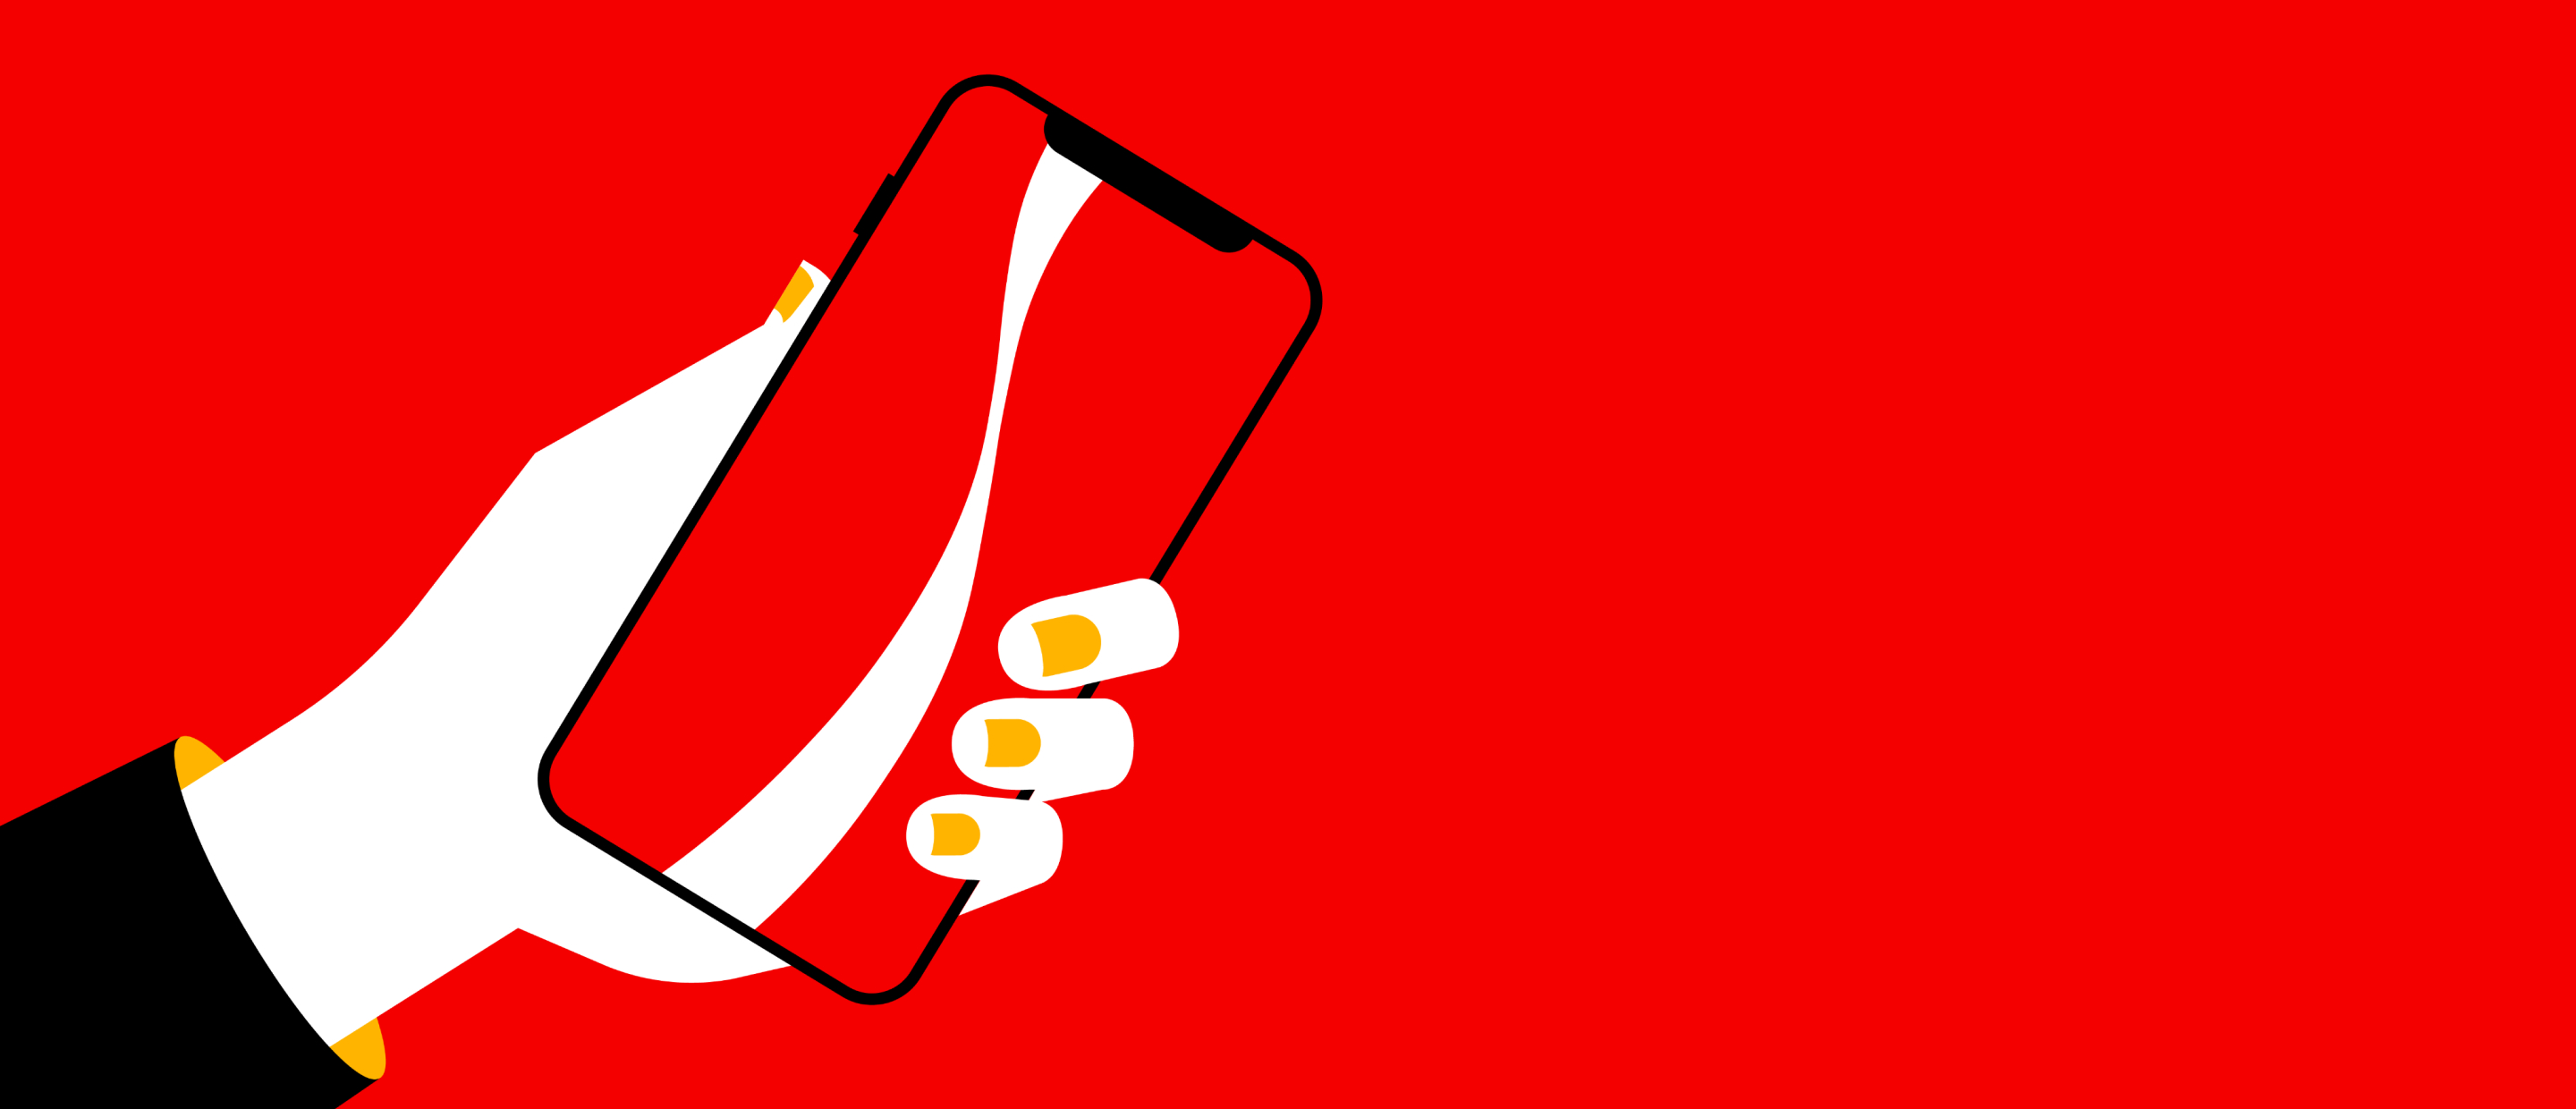 Vector image of a hand holding a phone depicting the Coca-Cola ribbon